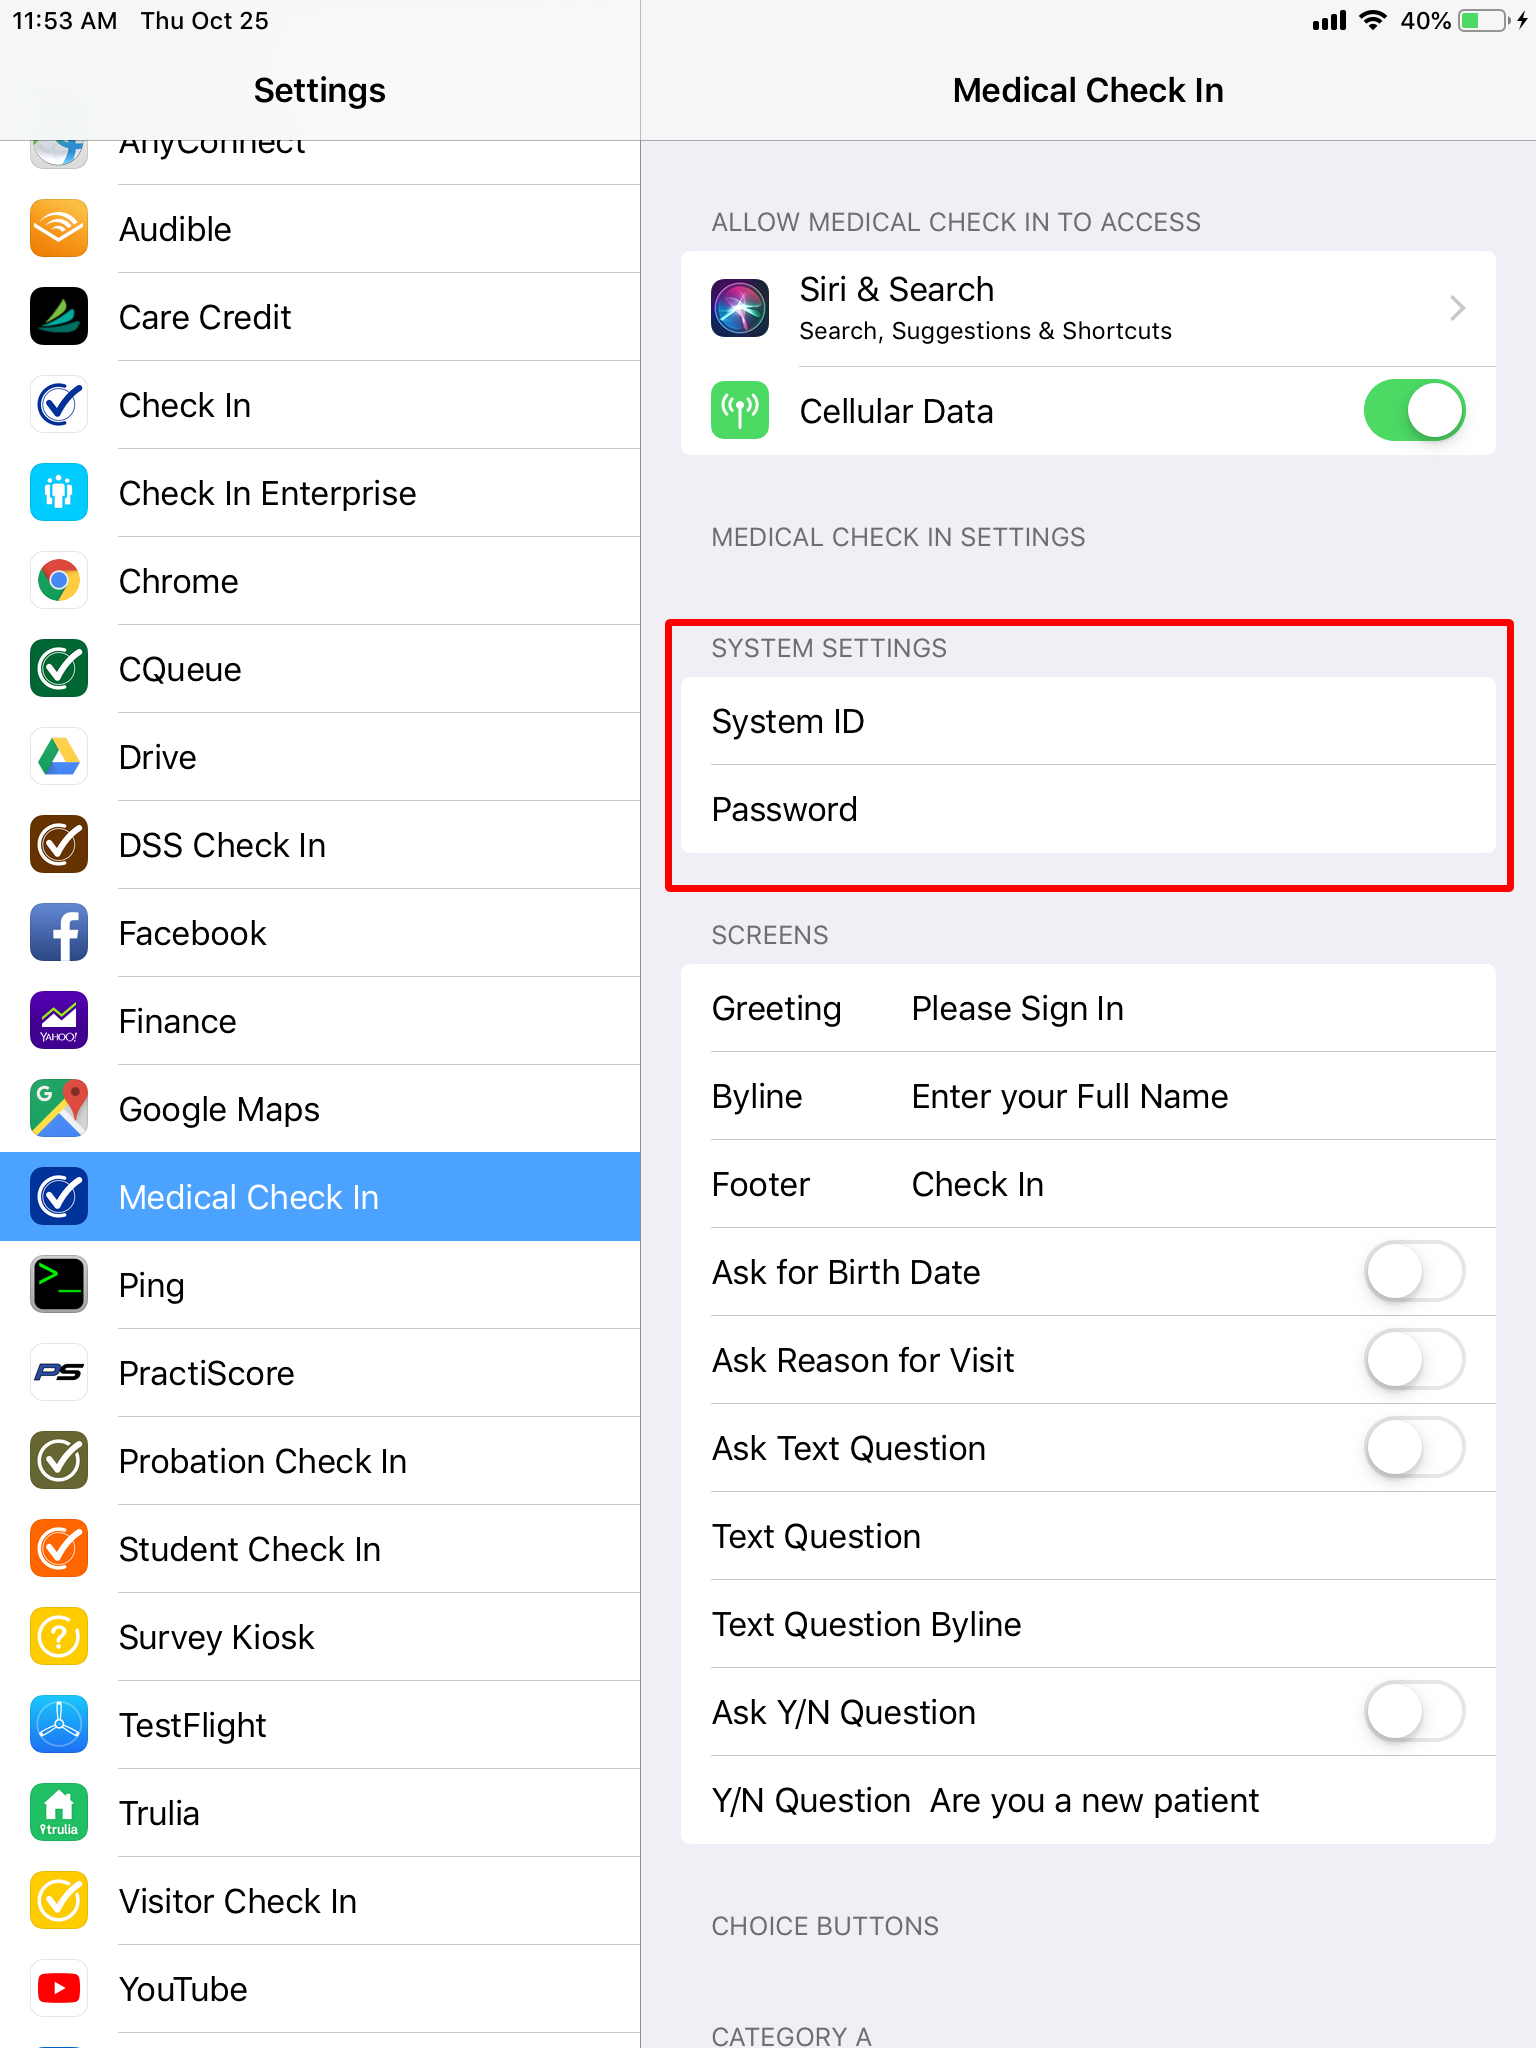 System settings for medical check in app